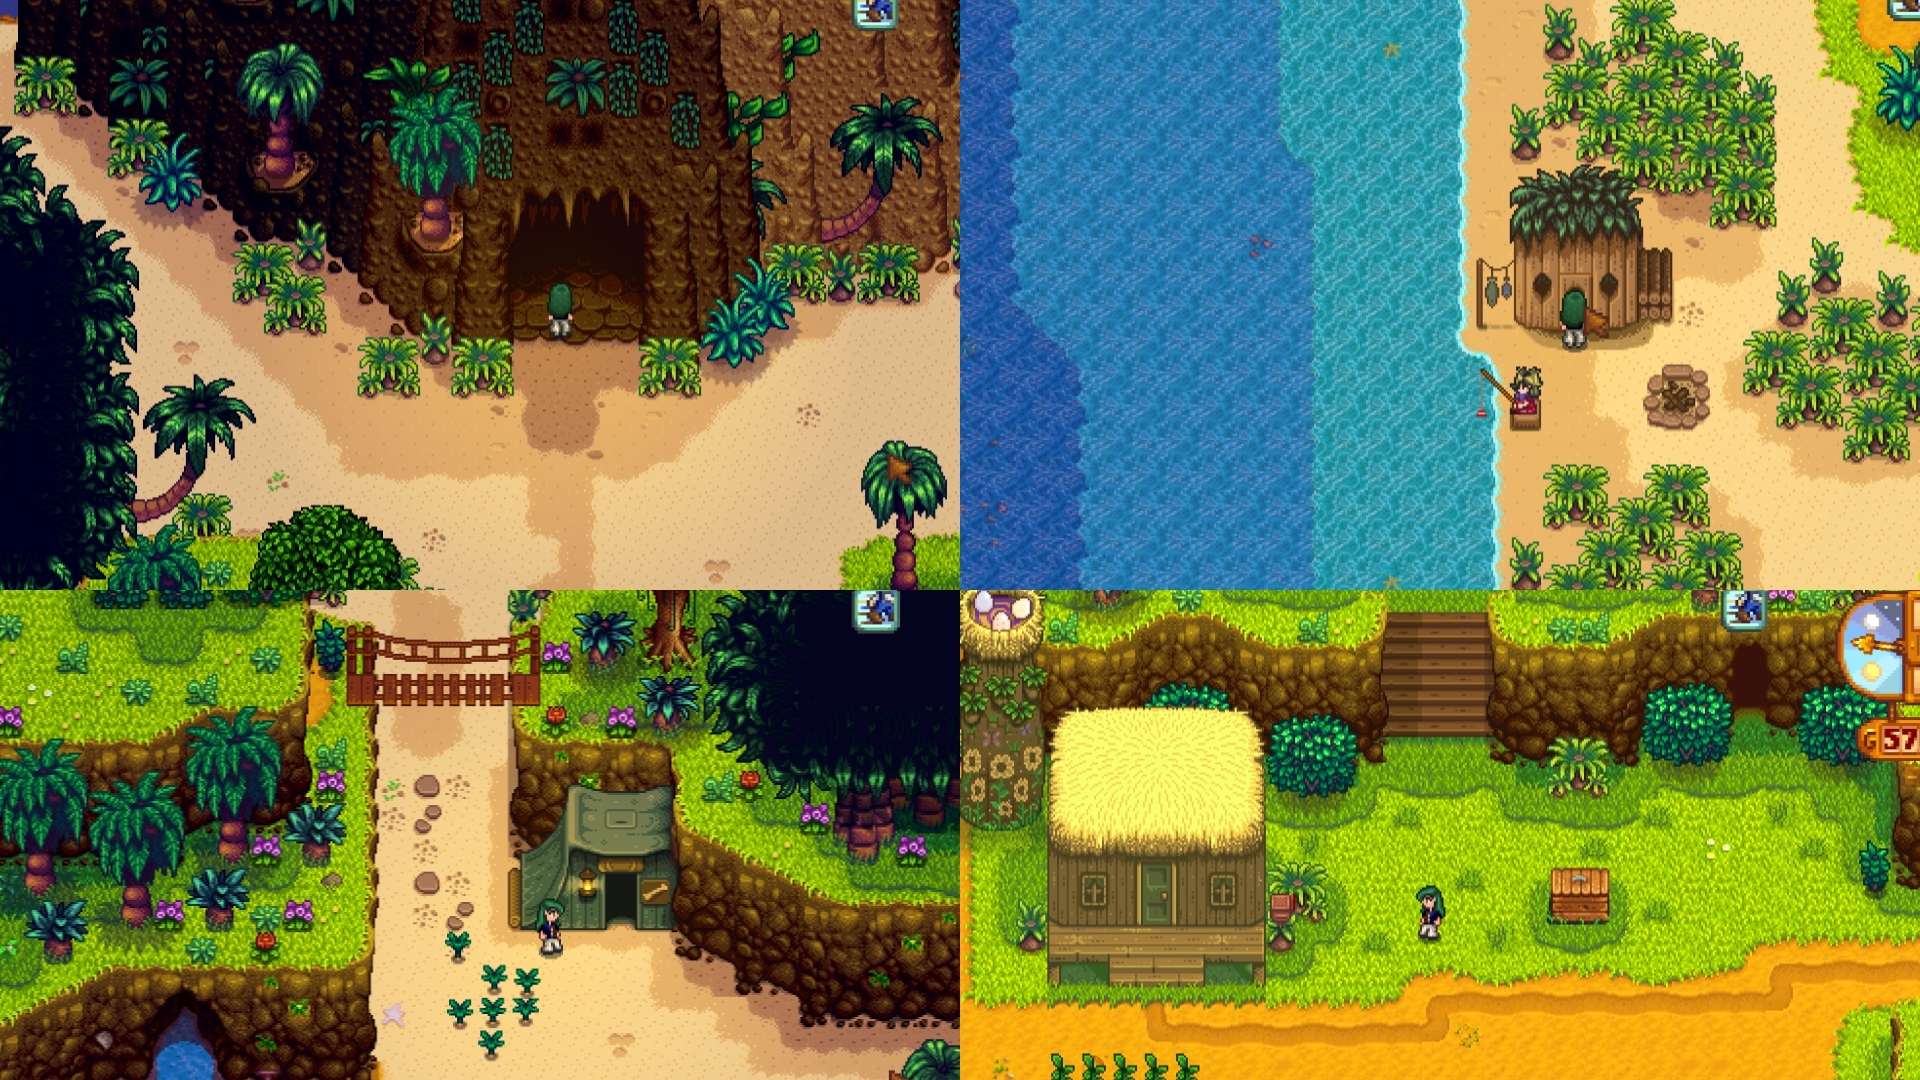 A few areas in Stardew Valley Ginger Island.